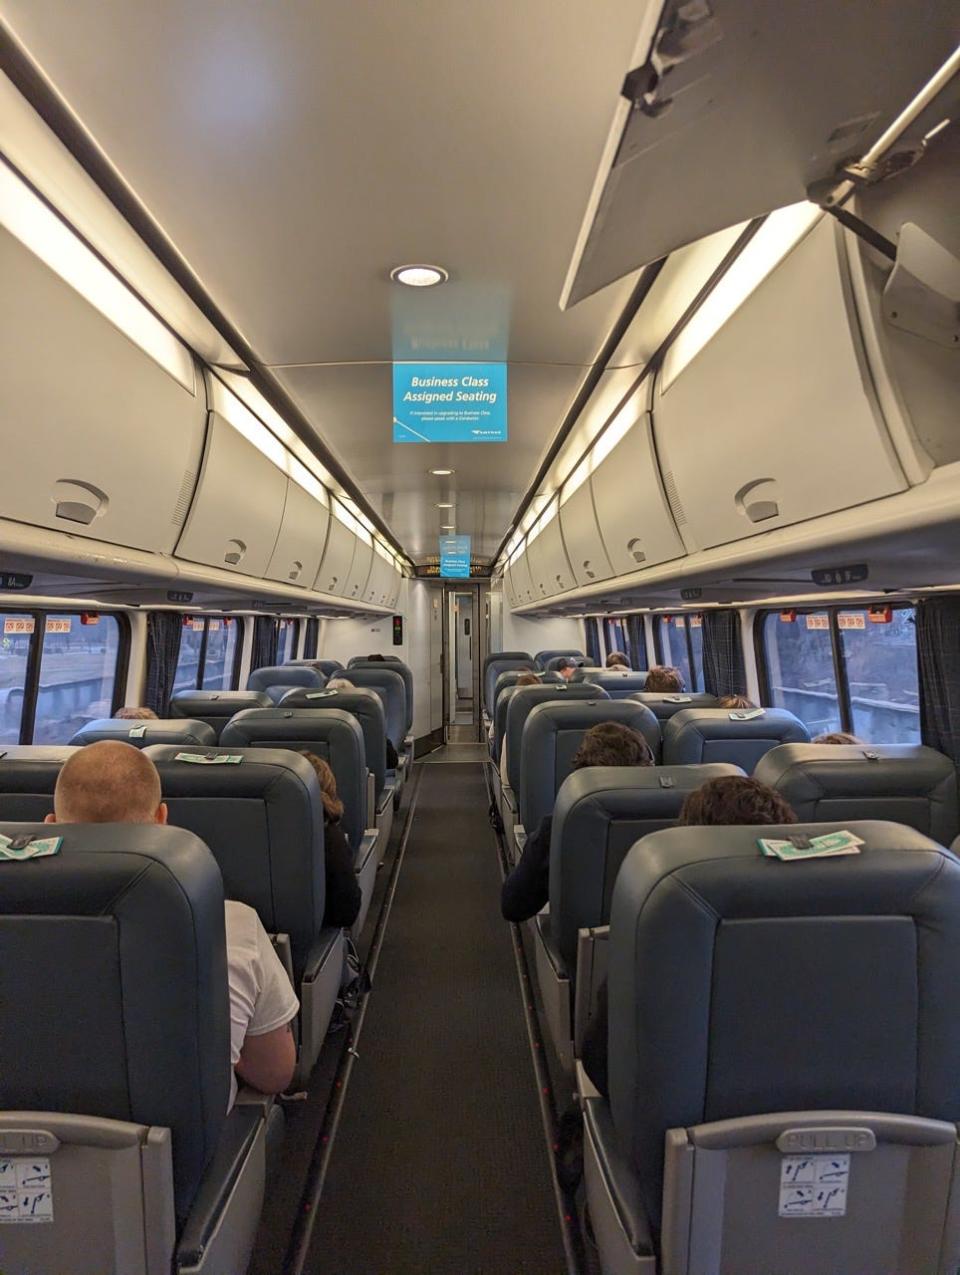 Business Class section of Amtrak train